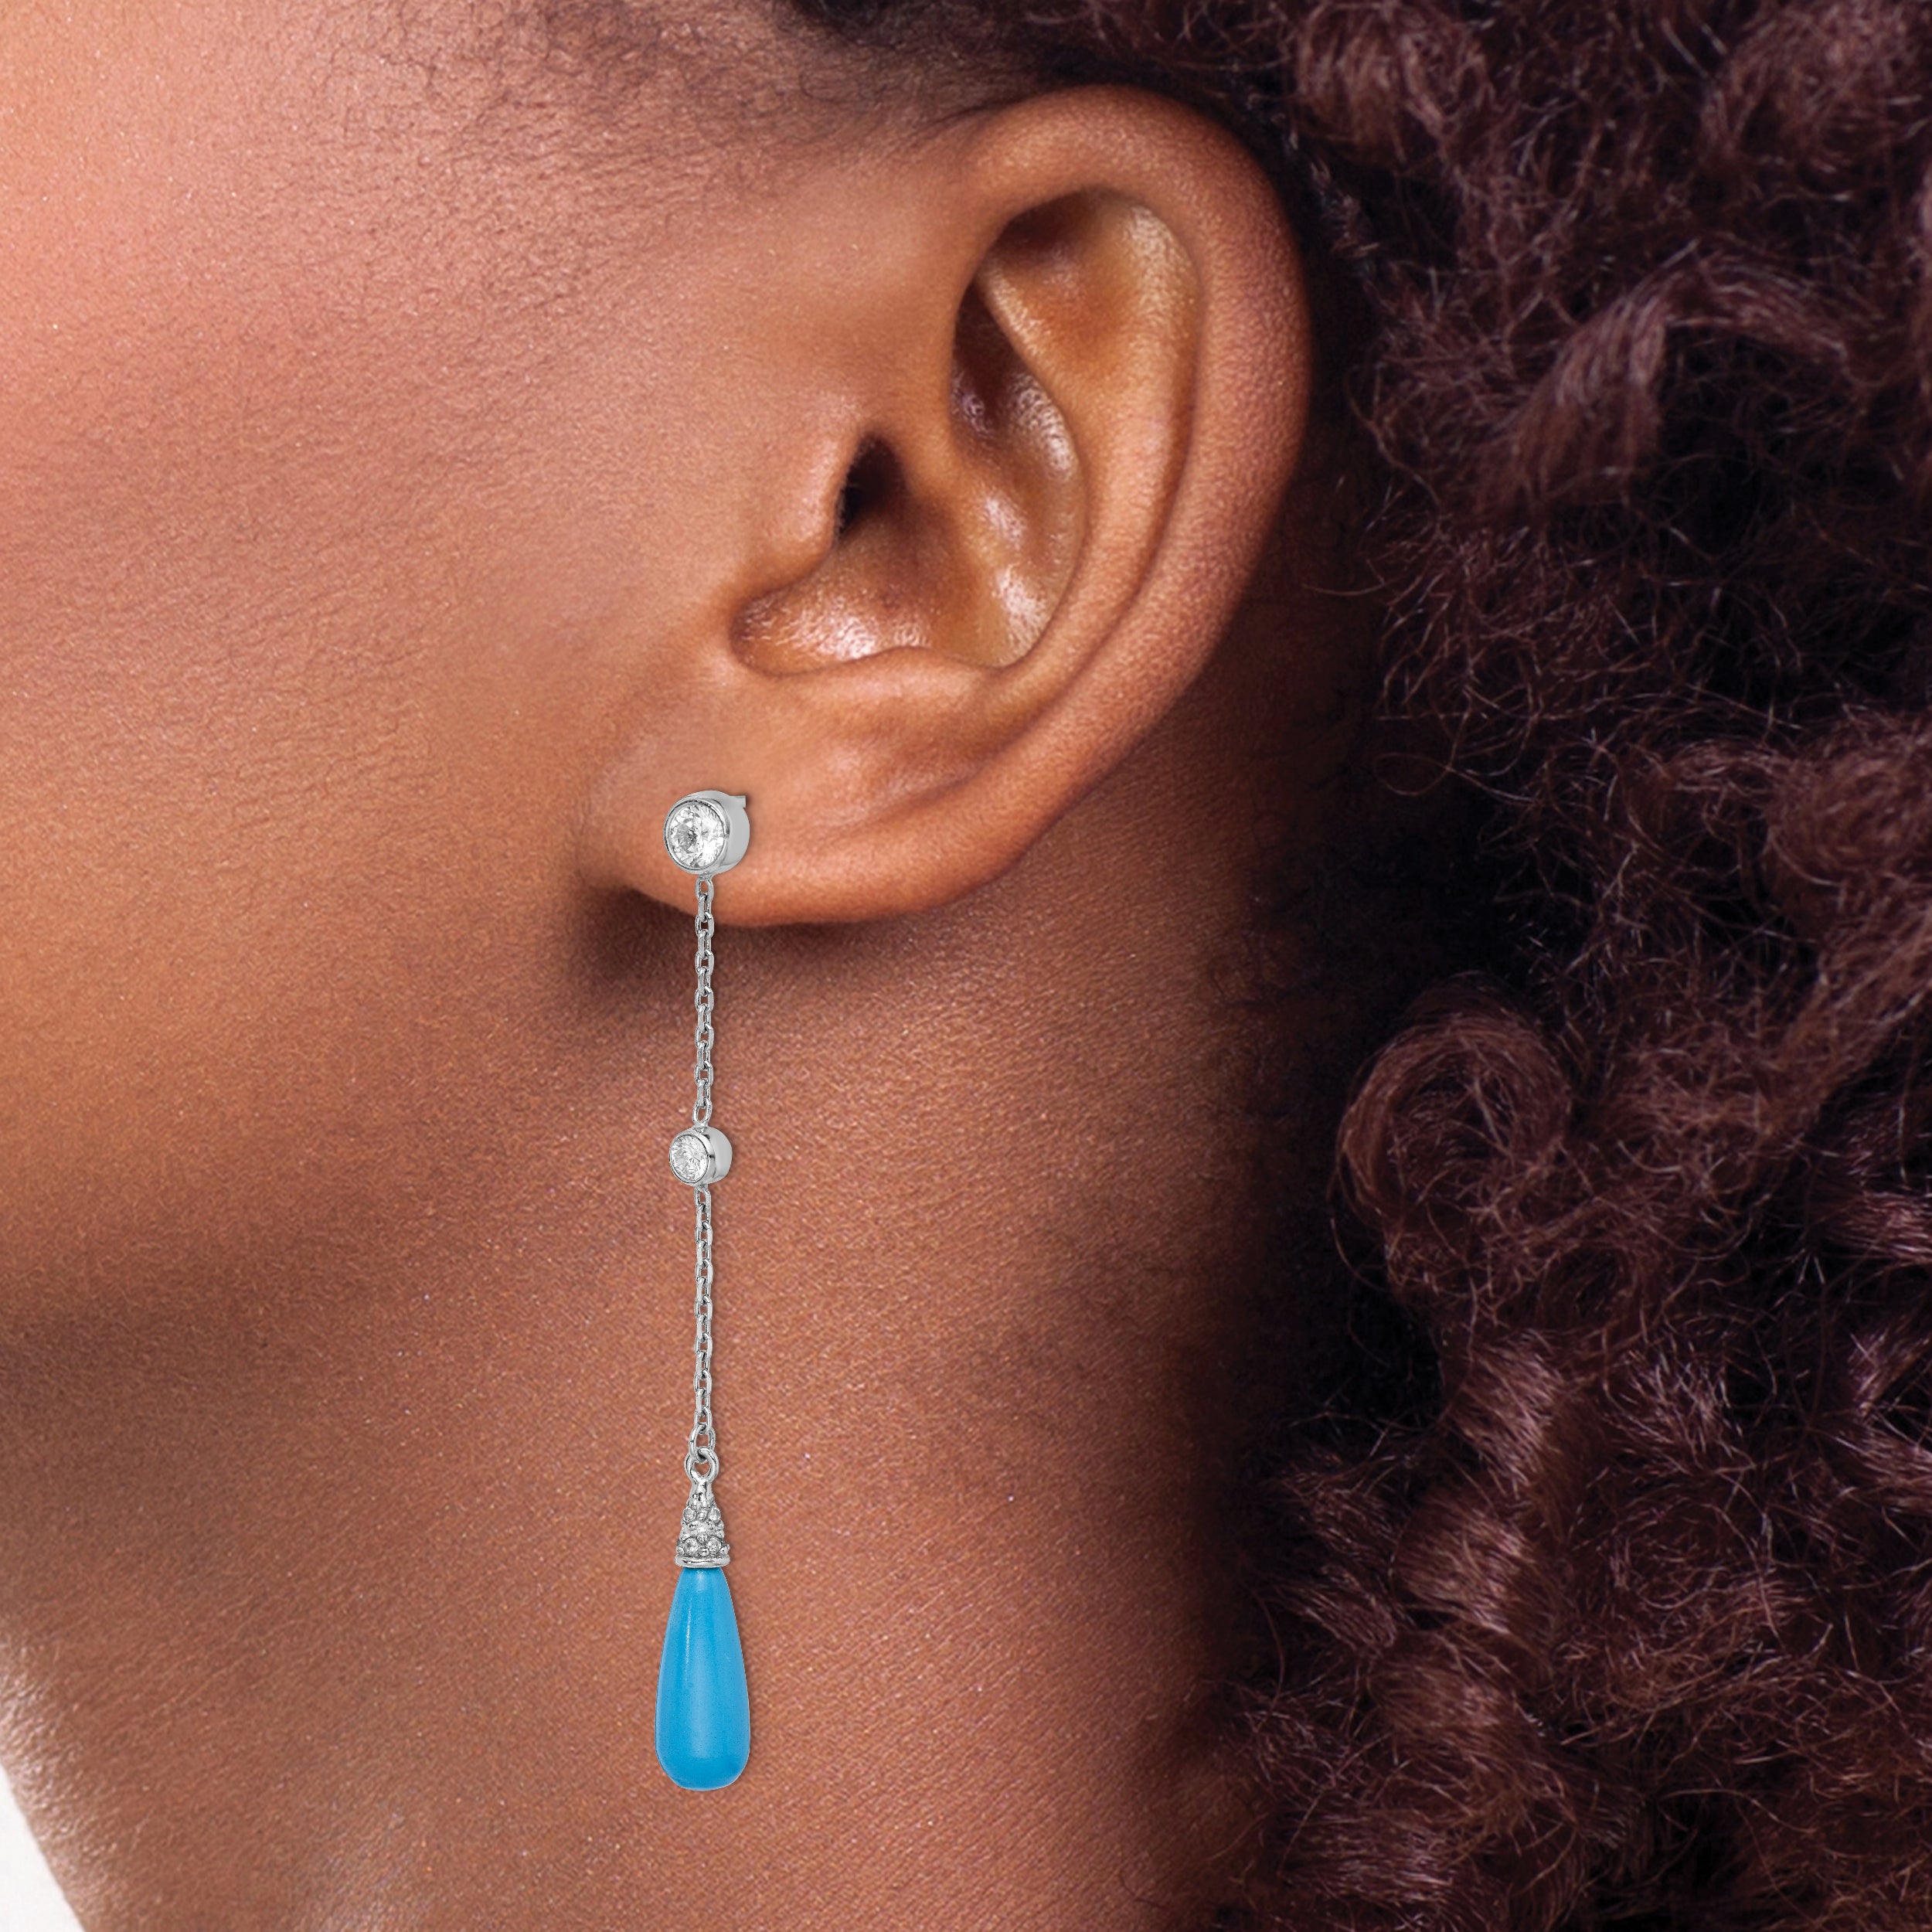 Sterling Silver Rhodium-plated Turquoise and CZ Post Dangle Earrings